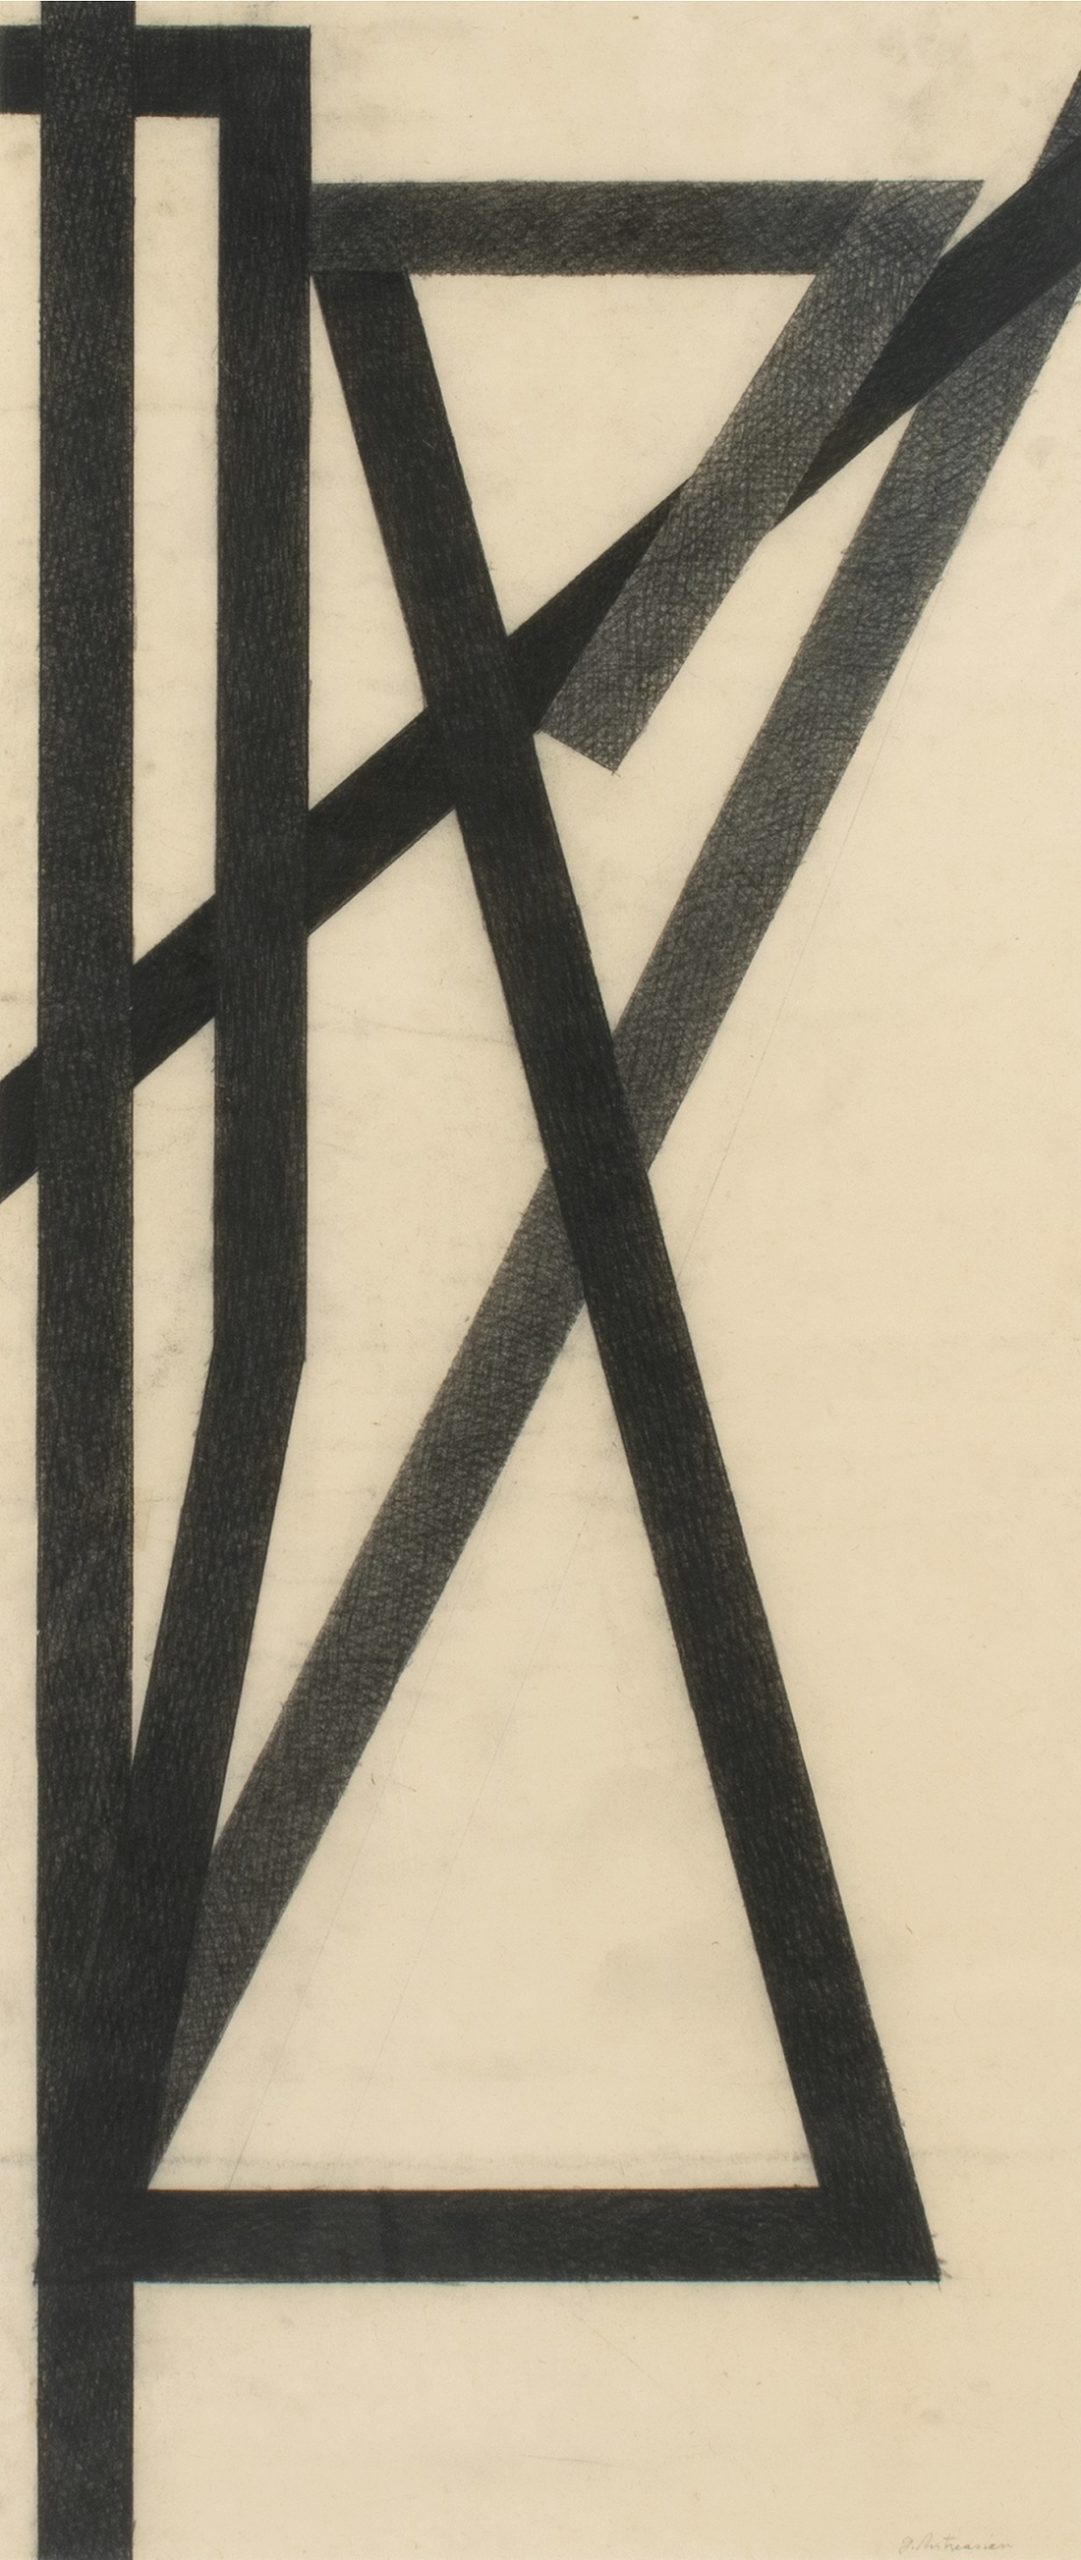 
		                					Garo Antreasian		                																	
																											<i>Transformations Plate 4,</i>  
																																								c. 2000, 
																																								charcoal on paper, 
																																								 46 5/8 x 19 5/8 inches 
																								
		                				